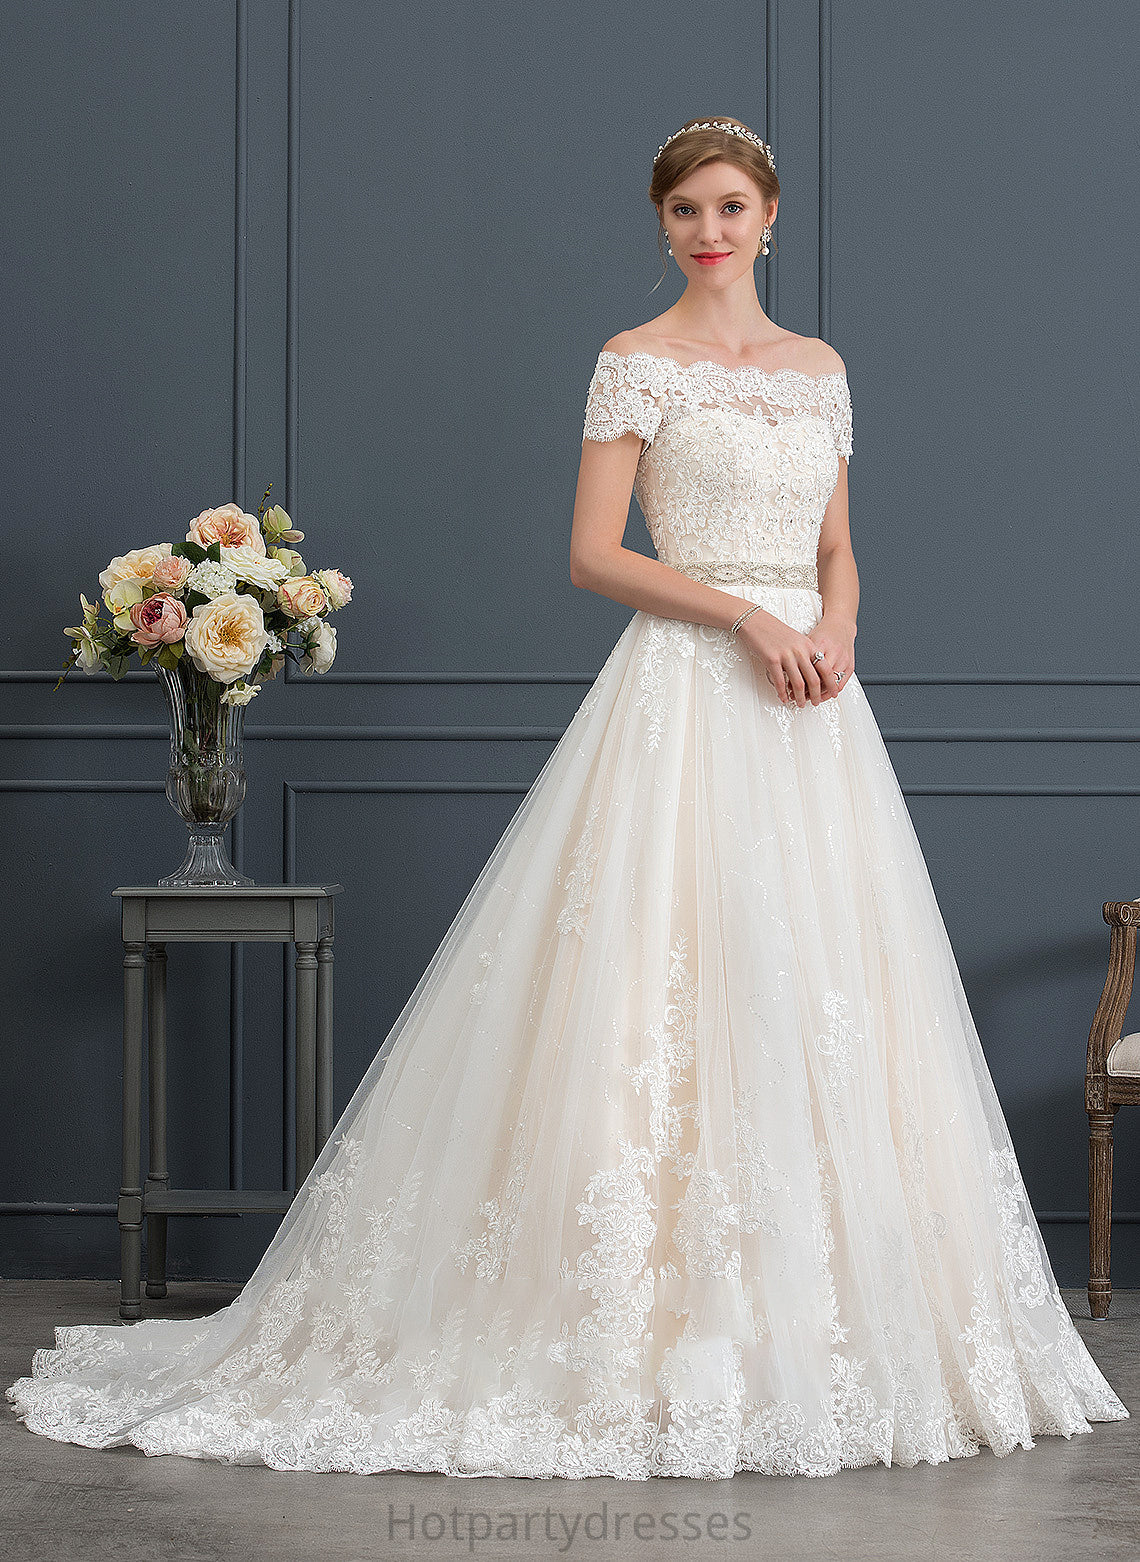 Court Wedding Sequins Ball-Gown/Princess Beading Amiya With Dress Tulle Wedding Dresses Train